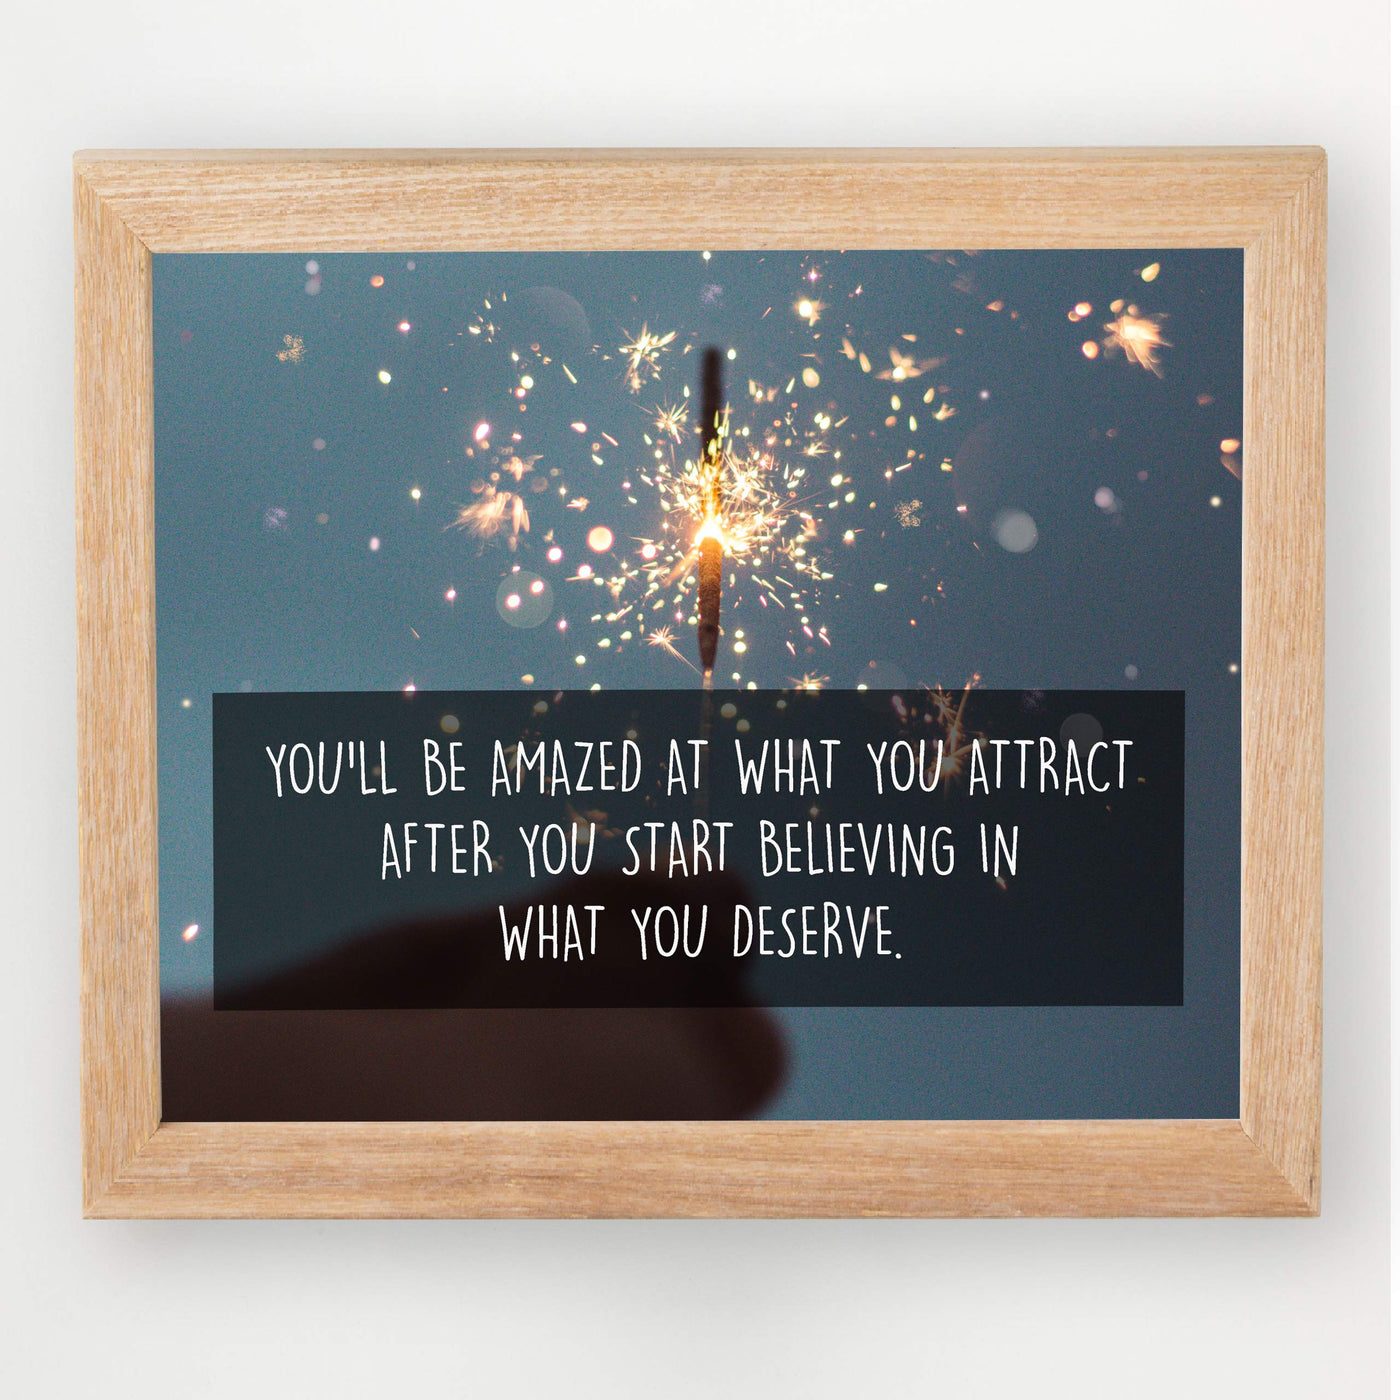 You'll Be Amazed at What You Attract-Life Quotes Wall Art -10 x 8" Inspirational Poster Print-Ready to Frame. Motivational Home-Office-Studio-Dorm Decor. Great Positive Sign! Start Believing!